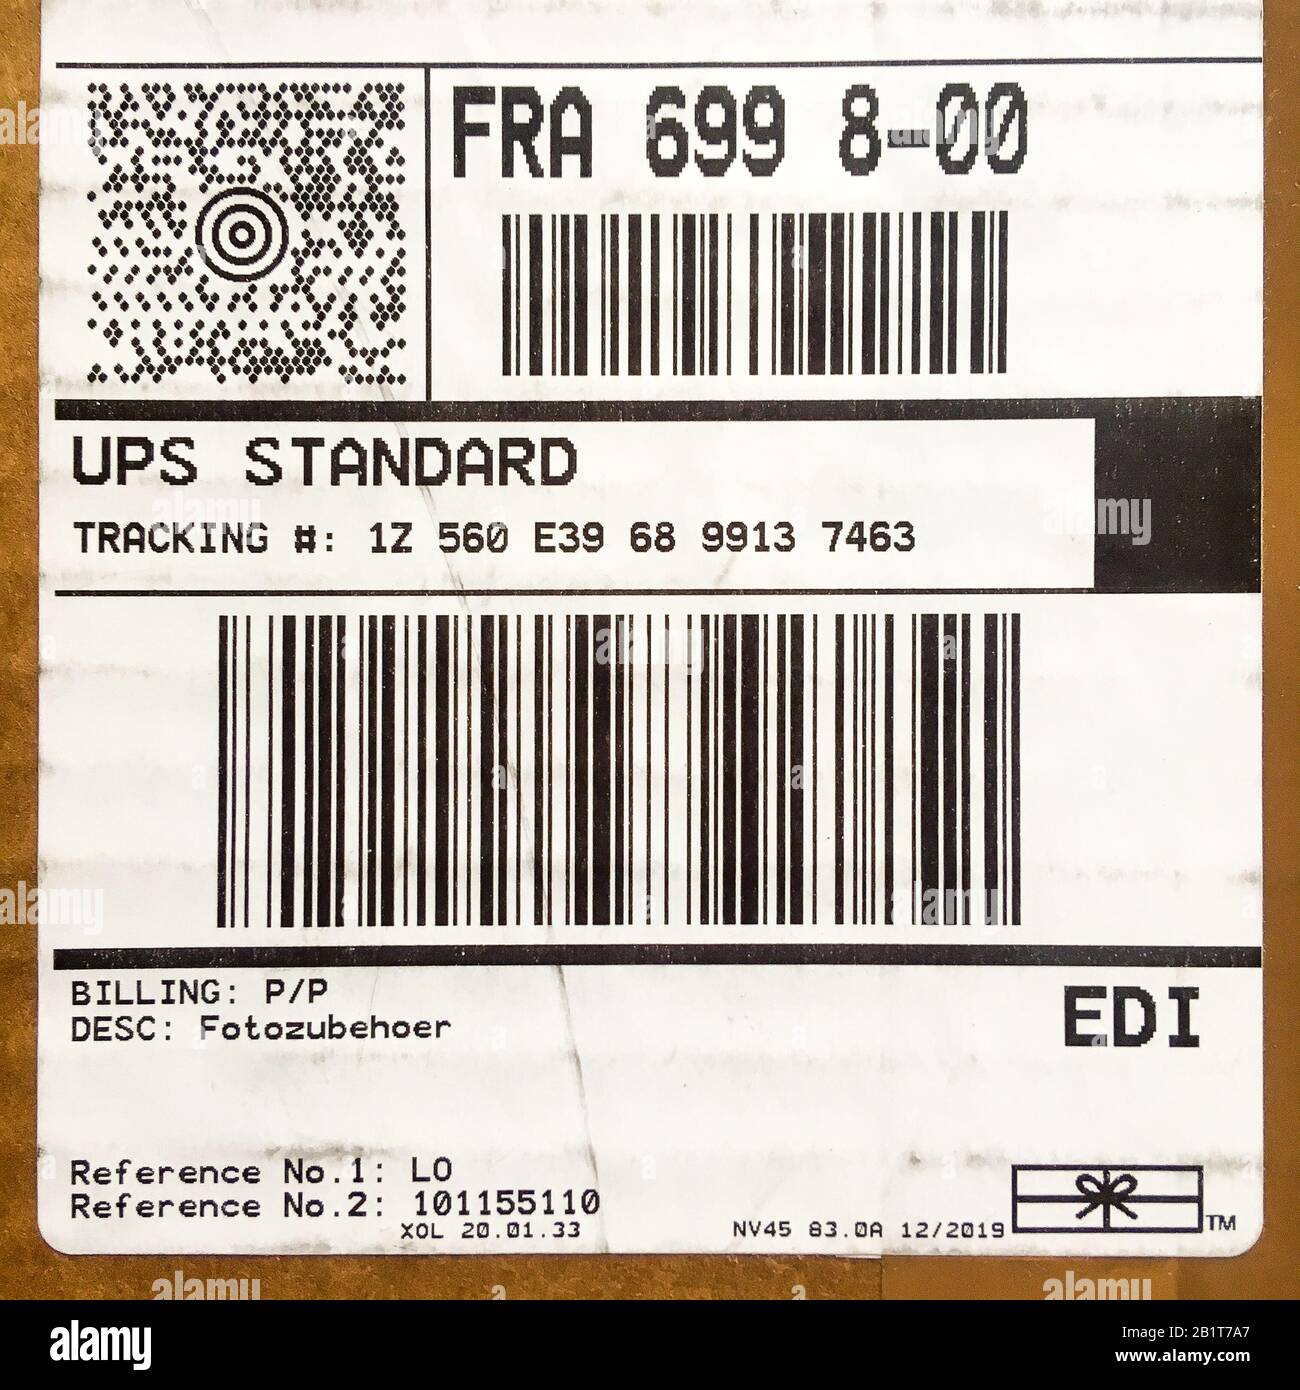 Amazon Prime enveloppe delivered by UPS company, France Stock Photo - Alamy